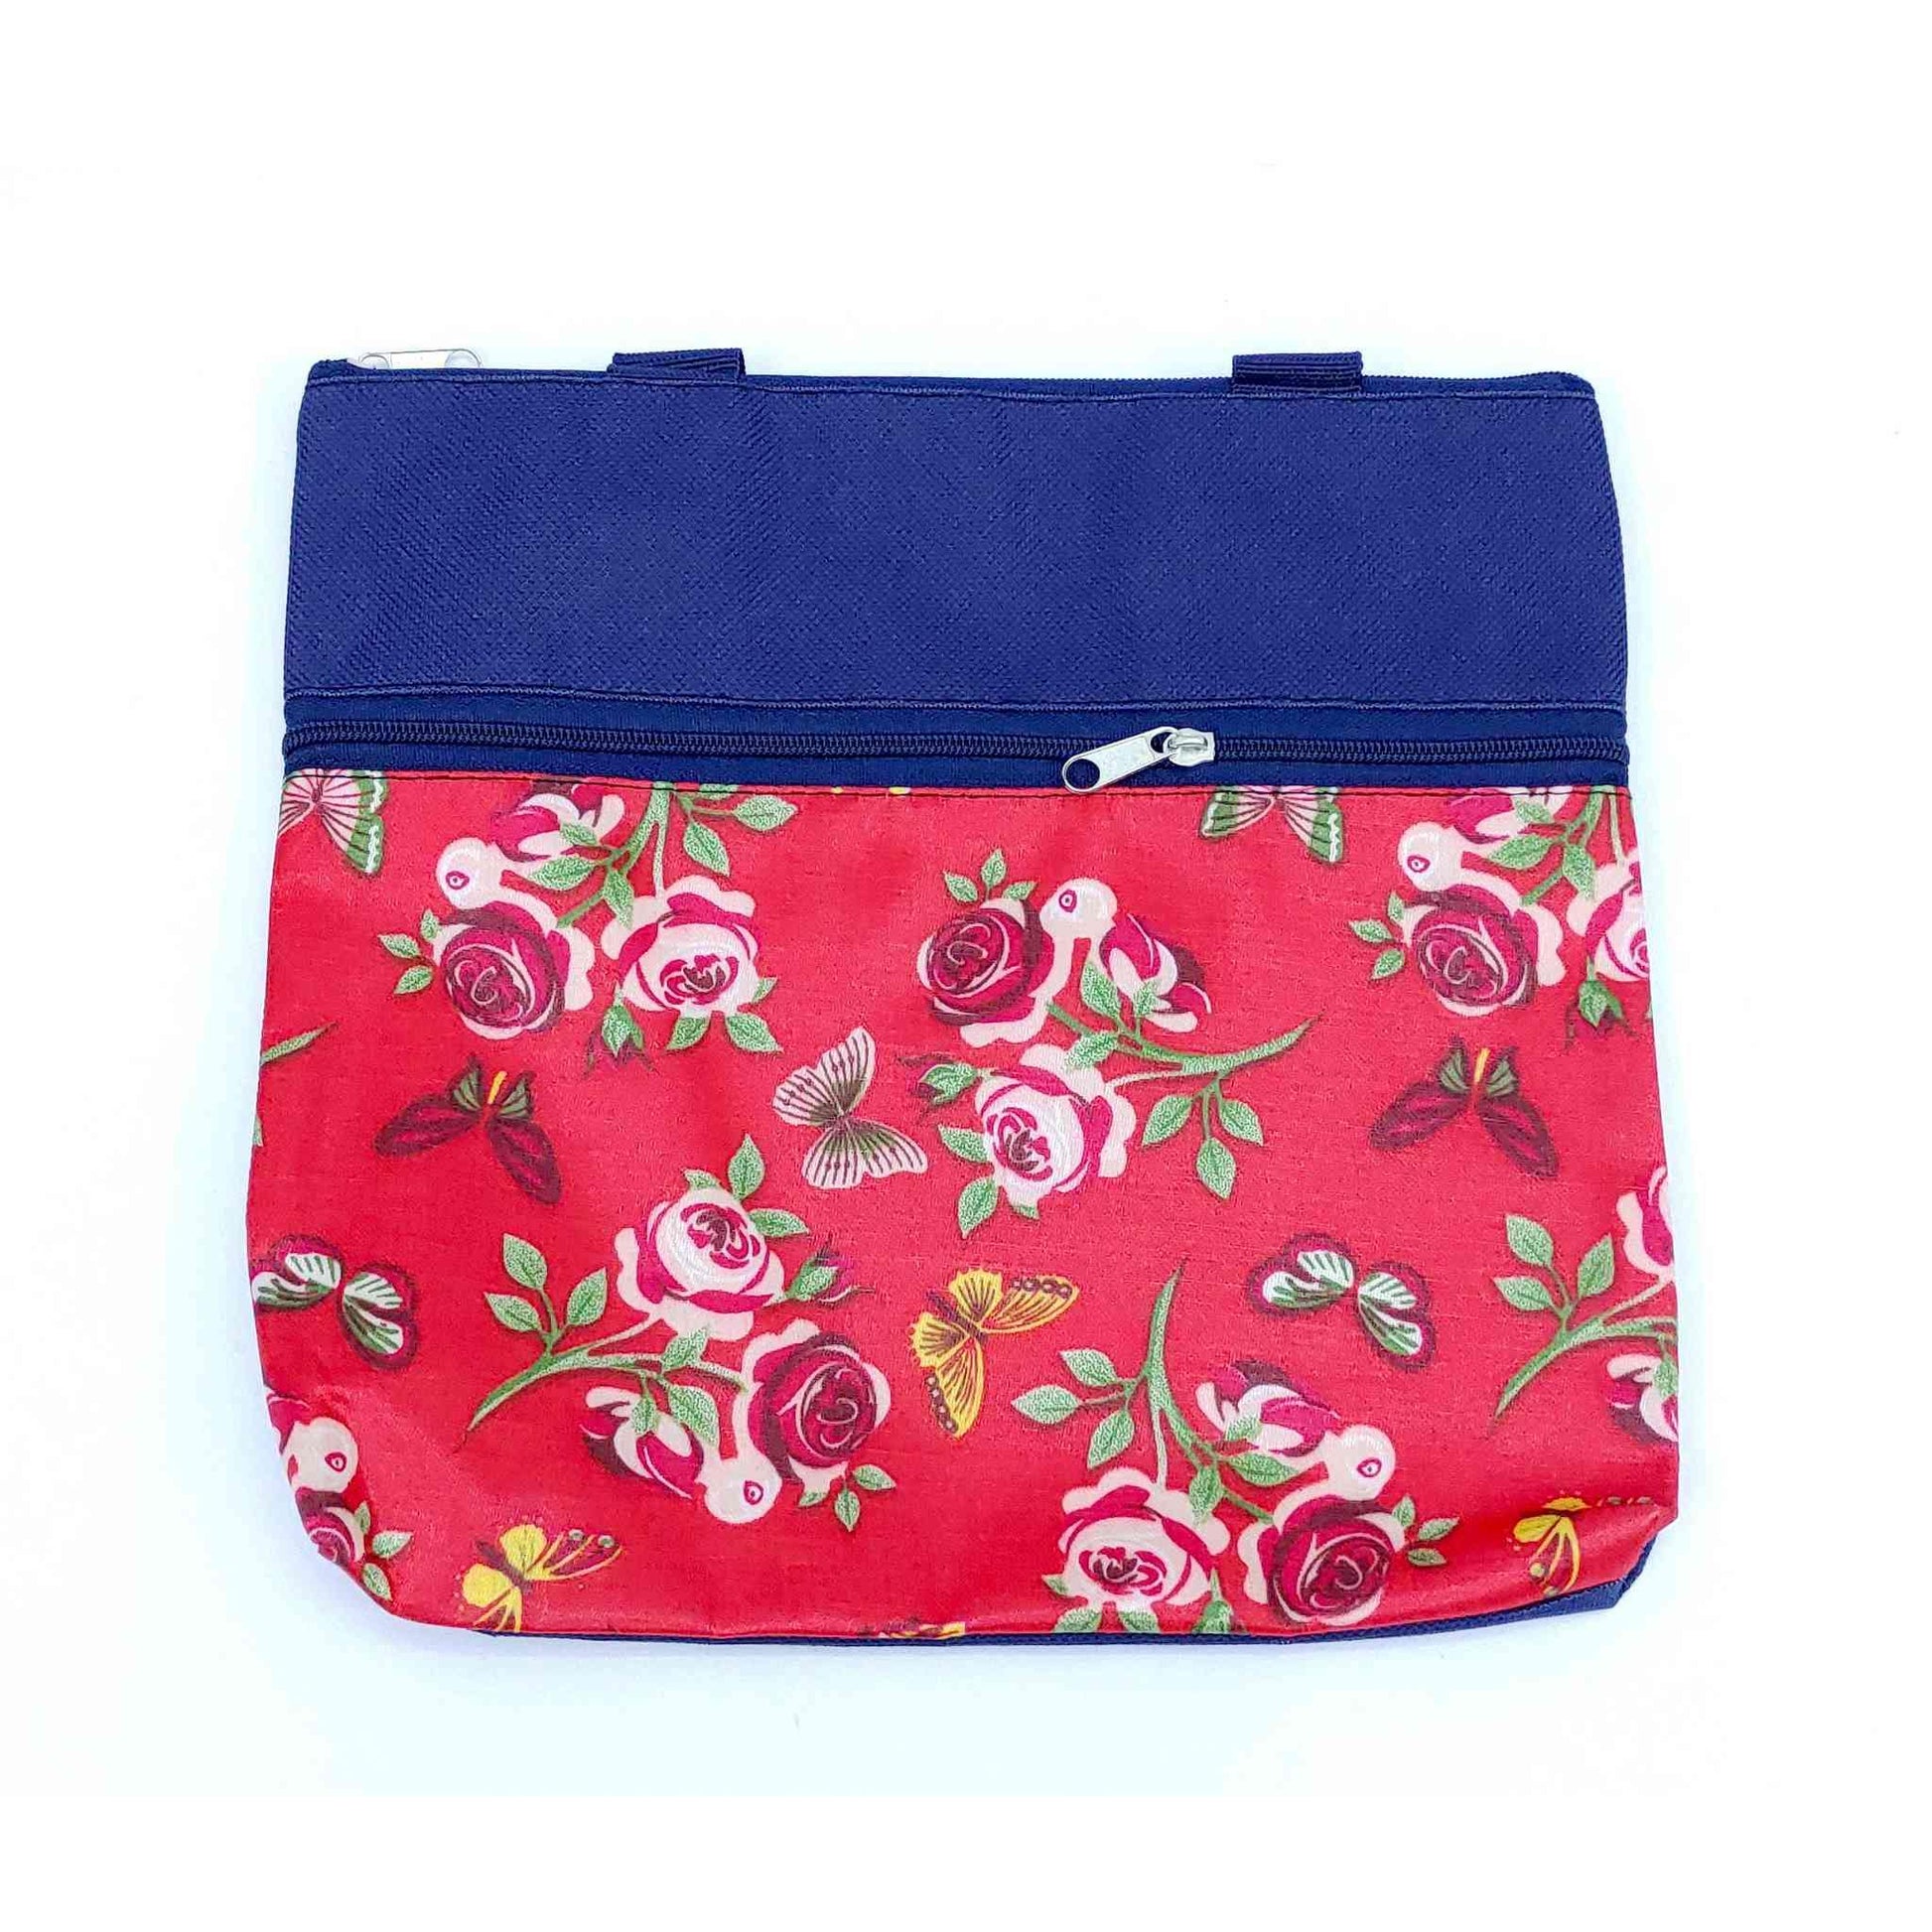 Imported Durable Canvas Printed multi purpose utility Medium size Bag with handles for all occasions for the girls and ladies, Design 3, Navy Blue - Indian Petals